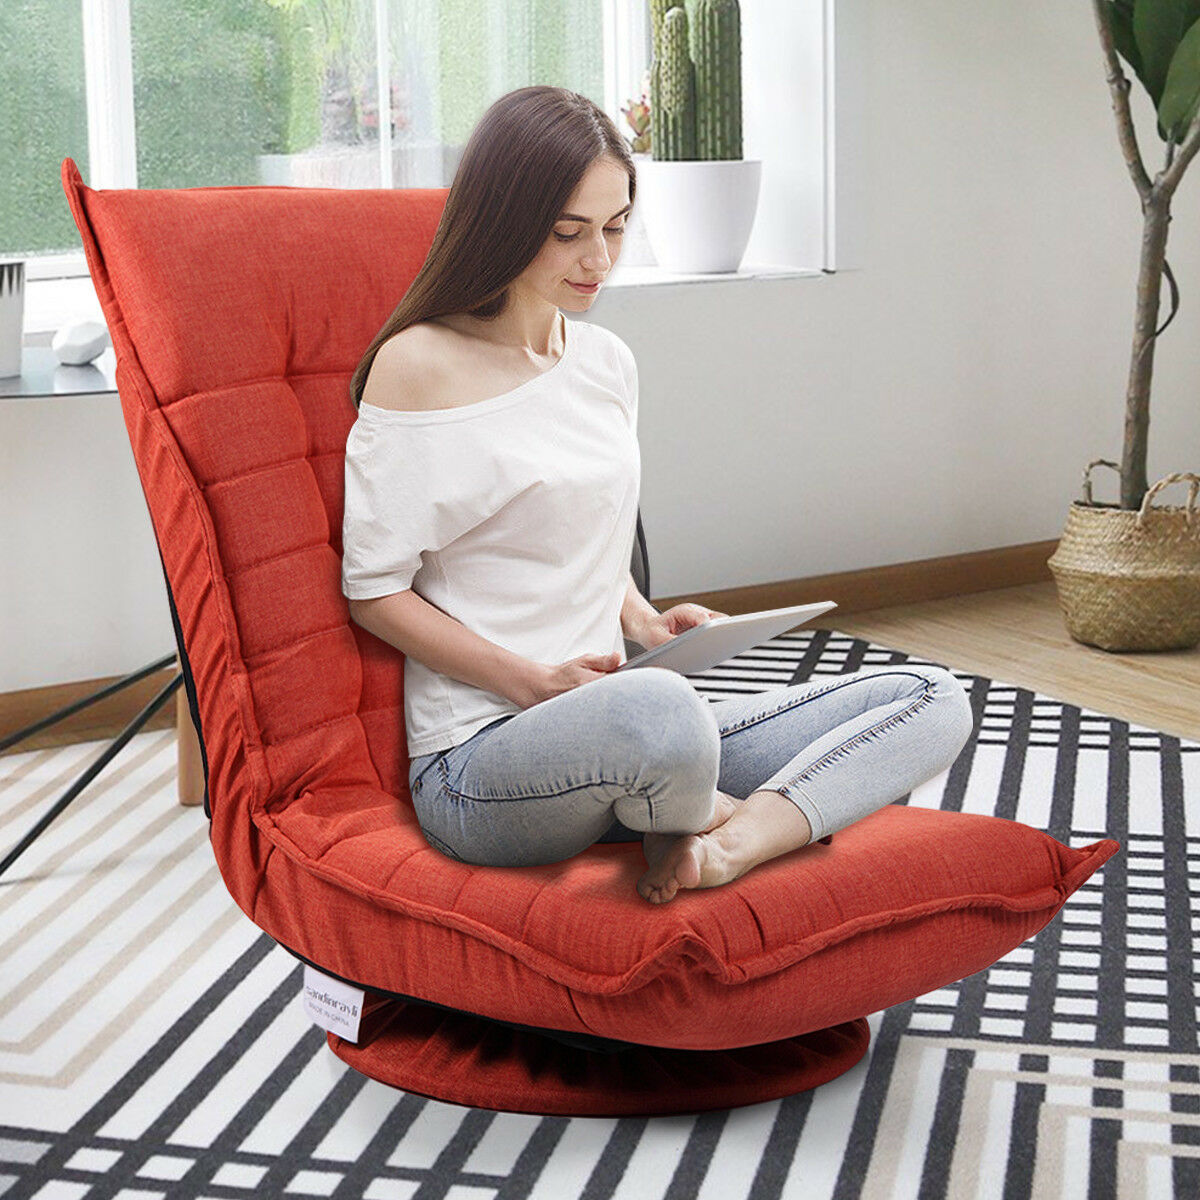 Veryke Lounge Chair, Red - image 1 of 6